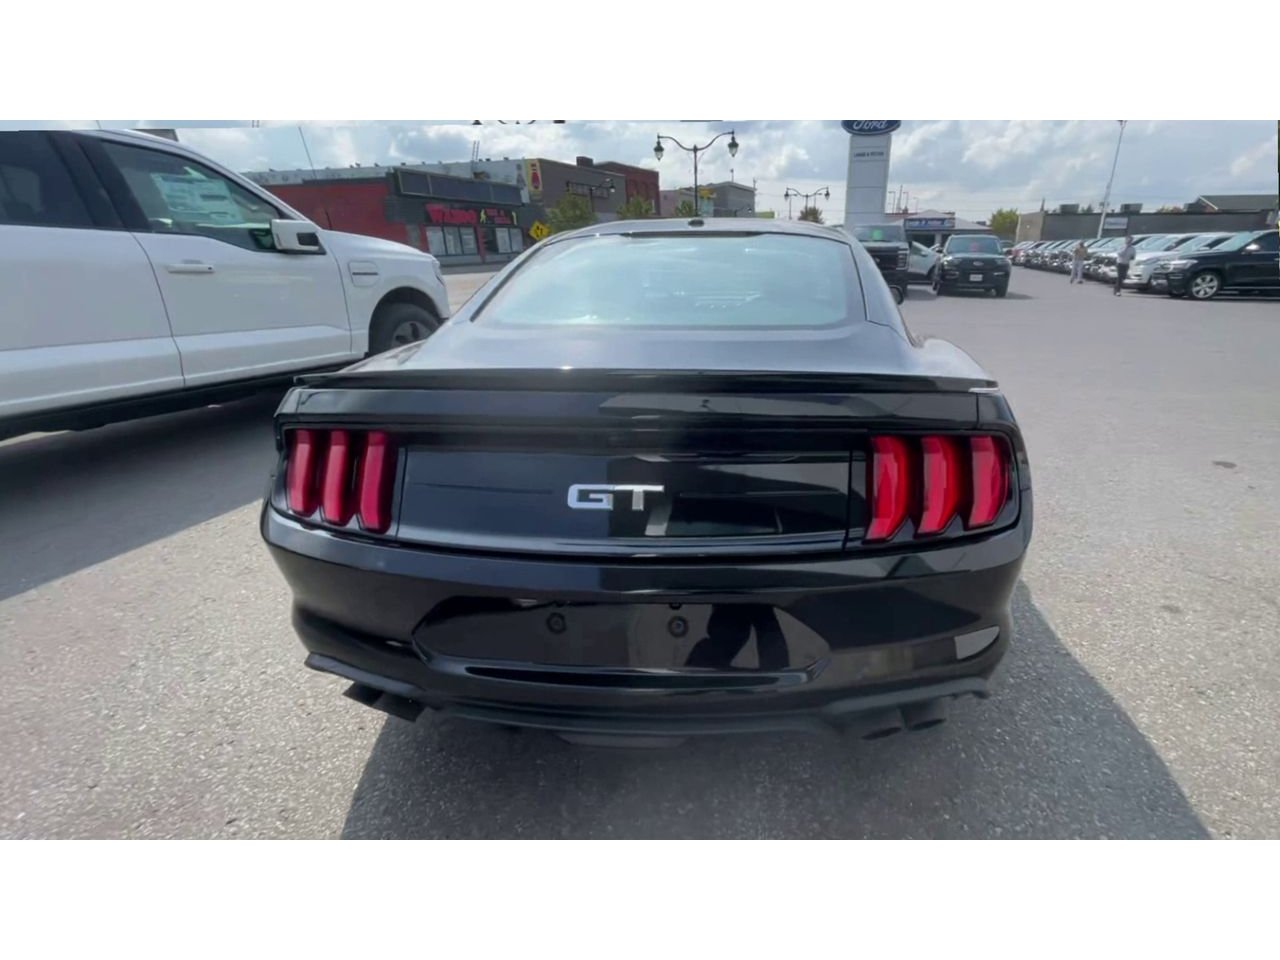 2019 Ford Mustang - P21400 Full Image 7